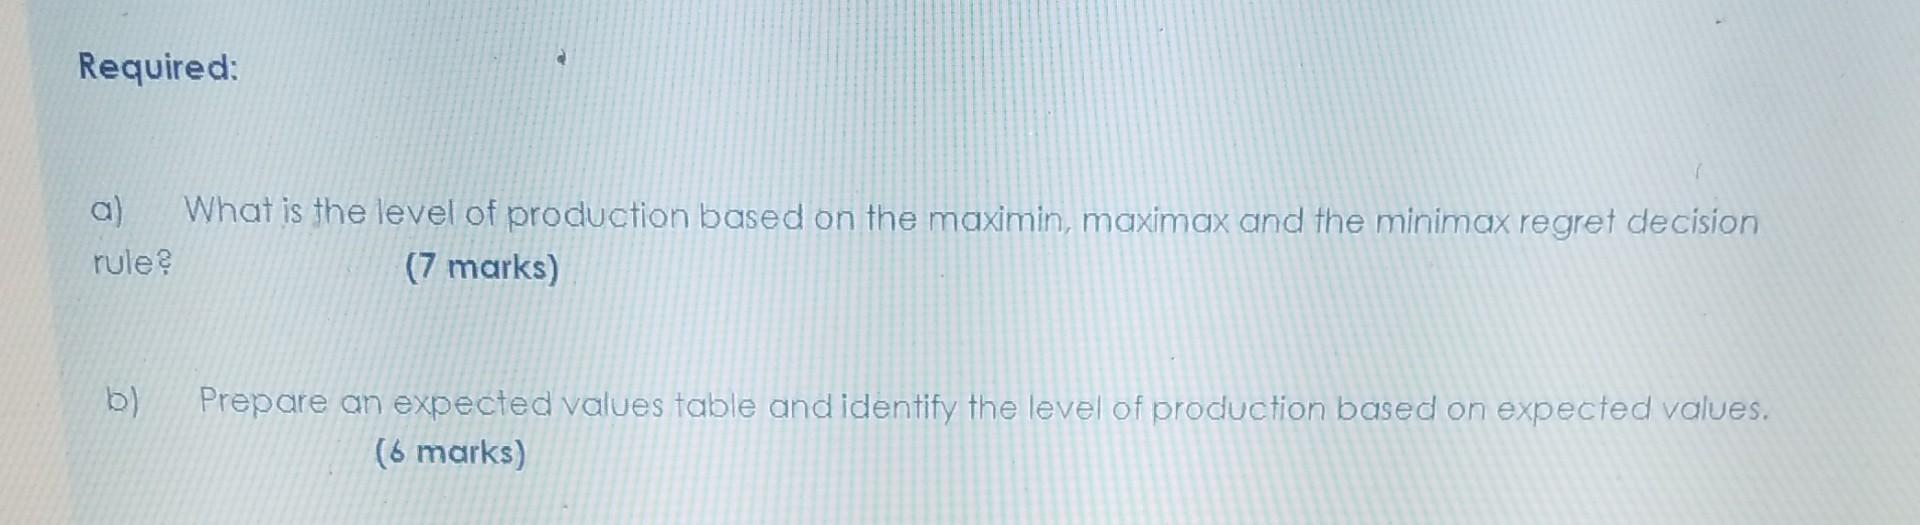 Required: a) What is the level of production based on the maximin, maximax and the minimax regret decision rule? (7 marks) b)